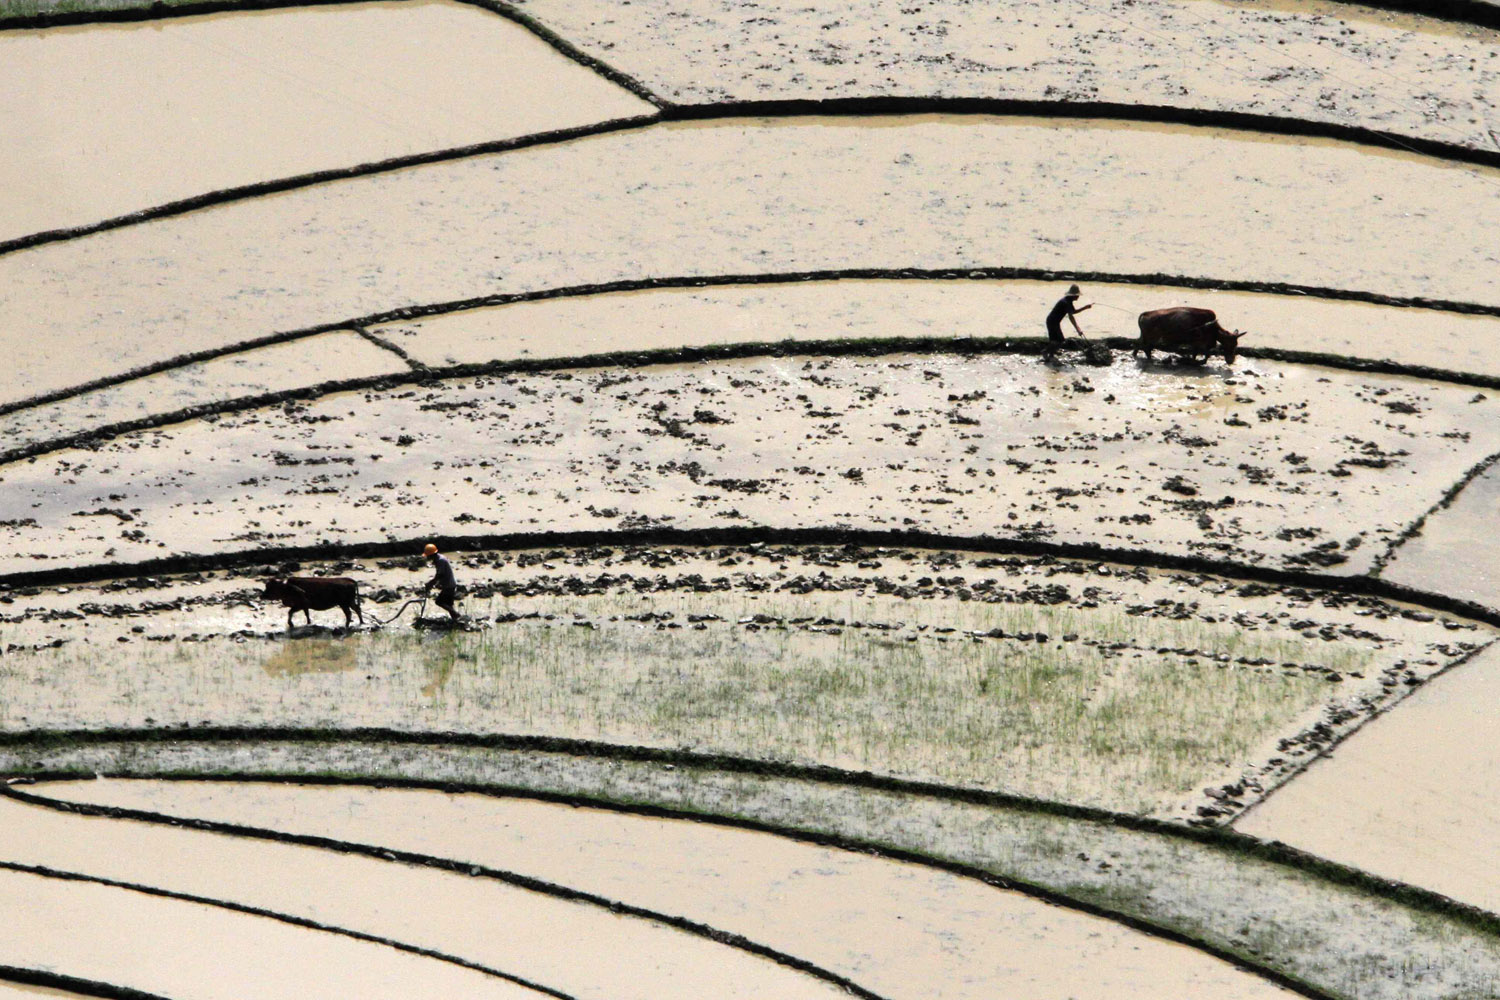 June 10, 2012. Taking advantage of recent rainfall, farmers work in the fields of Mou'ai Village in Fengshan, China.